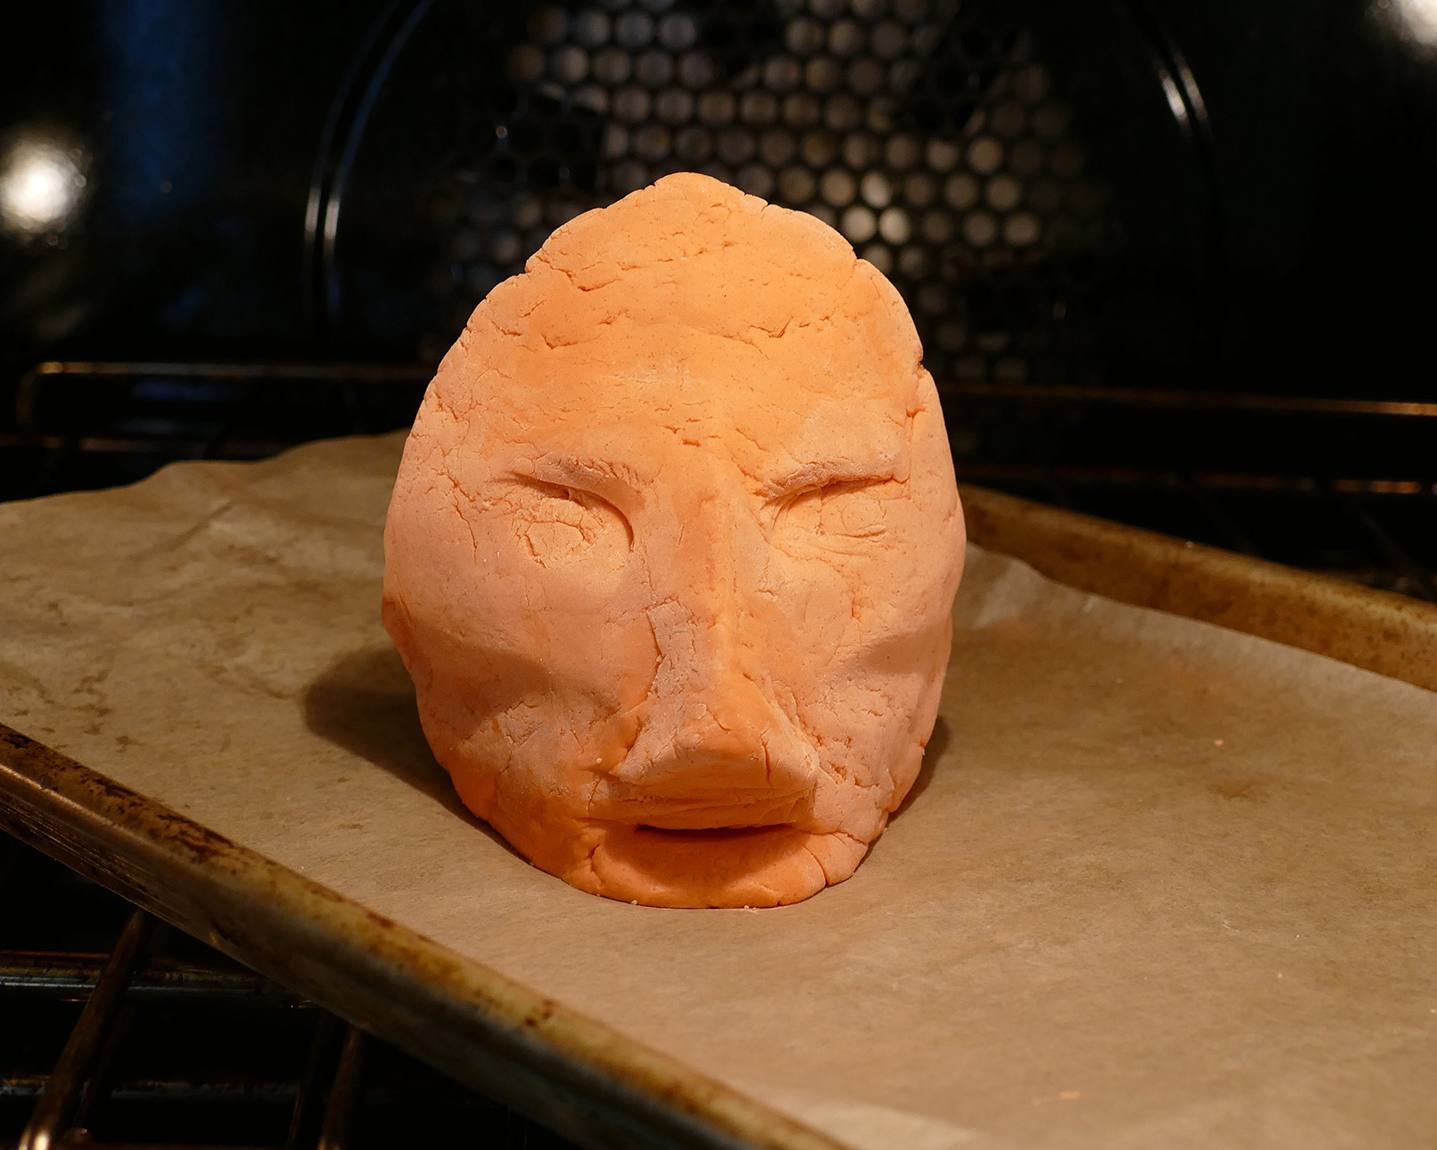 A head formed from handmade clay, on a baking sheet in an oven.